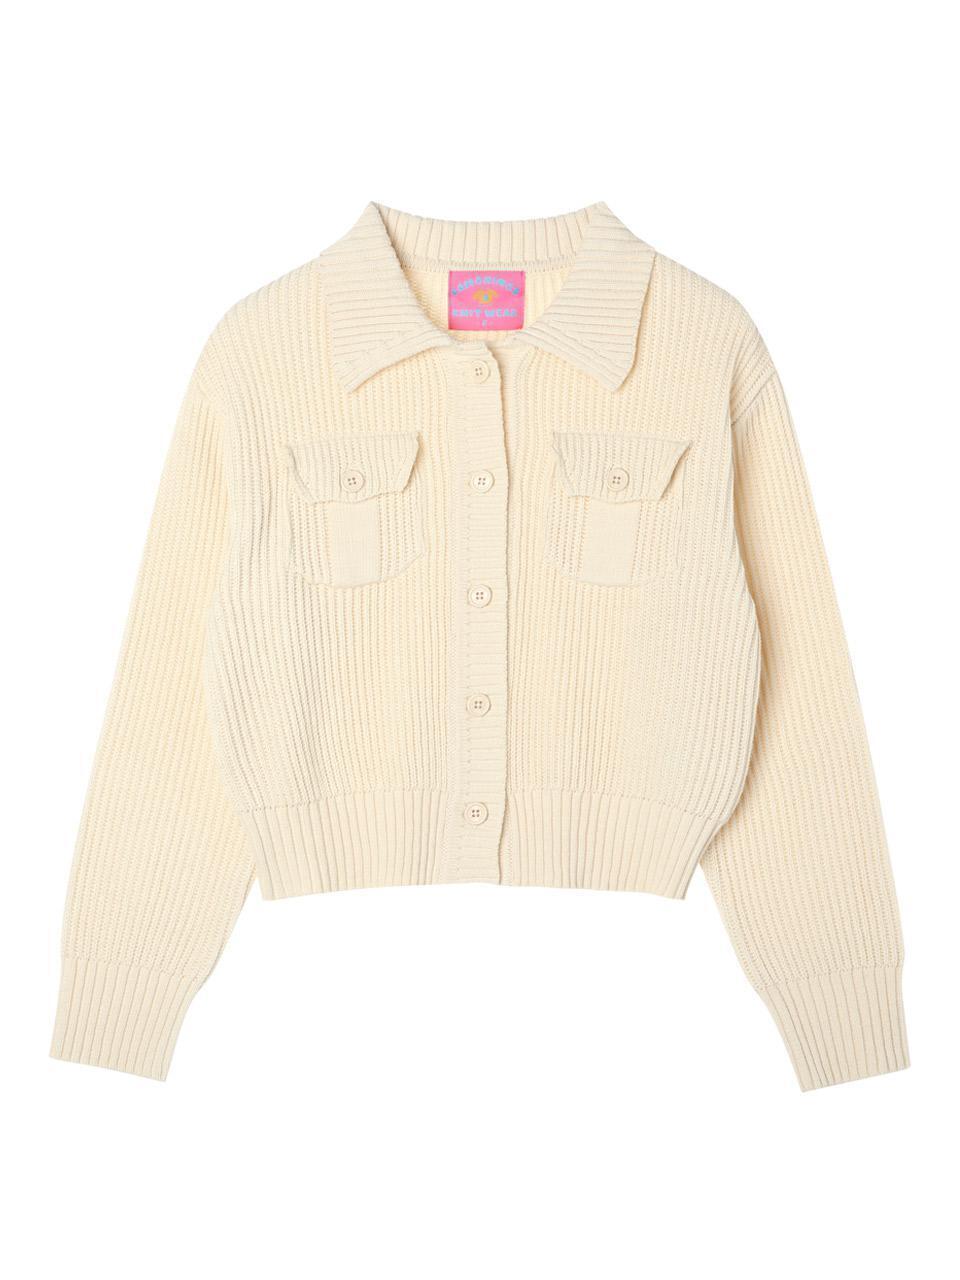 W TWO POCKET KNIT CARDIGAN [3 COLOR]